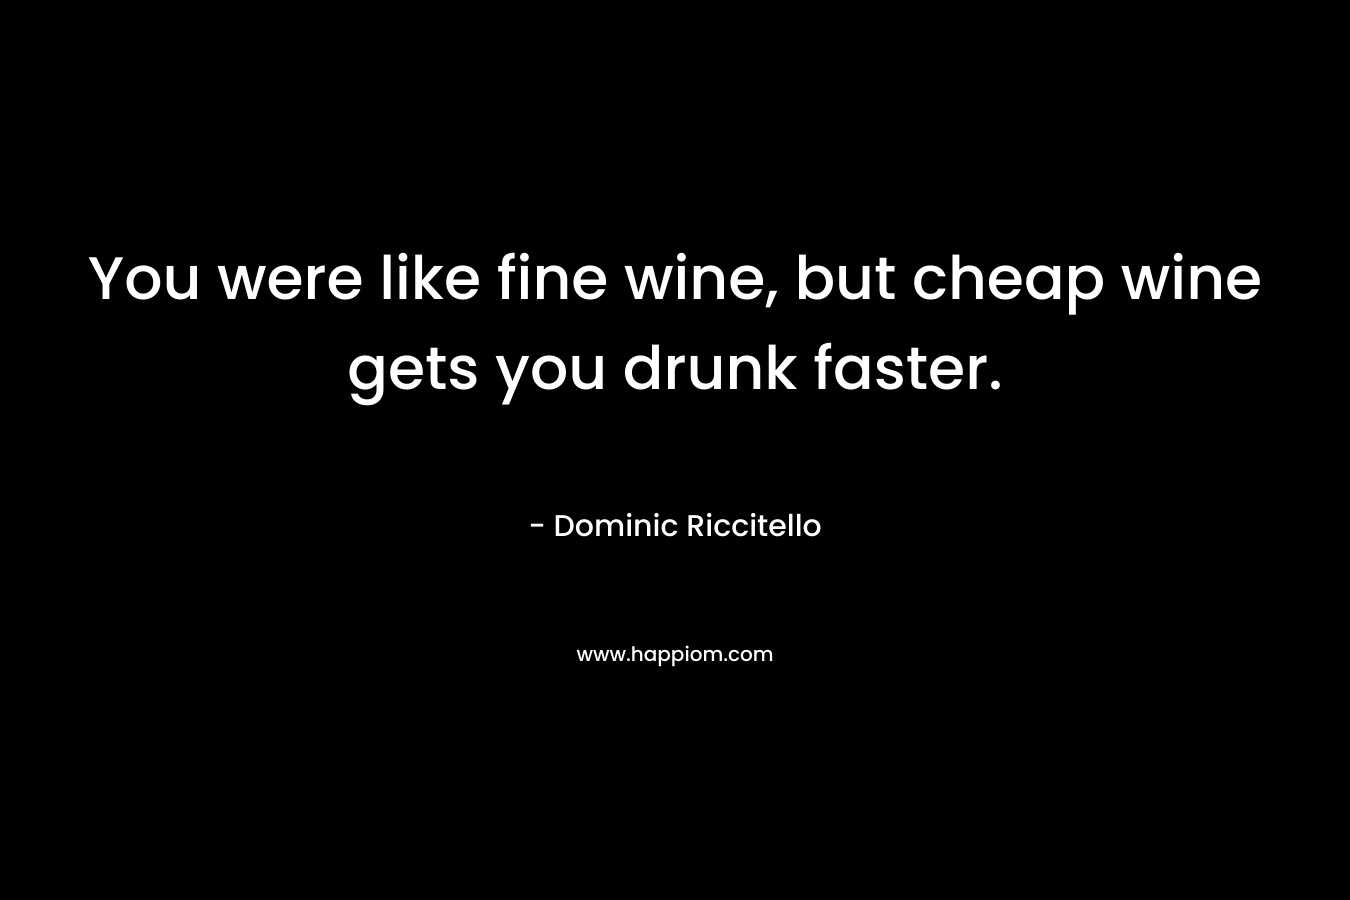 You were like fine wine, but cheap wine gets you drunk faster.